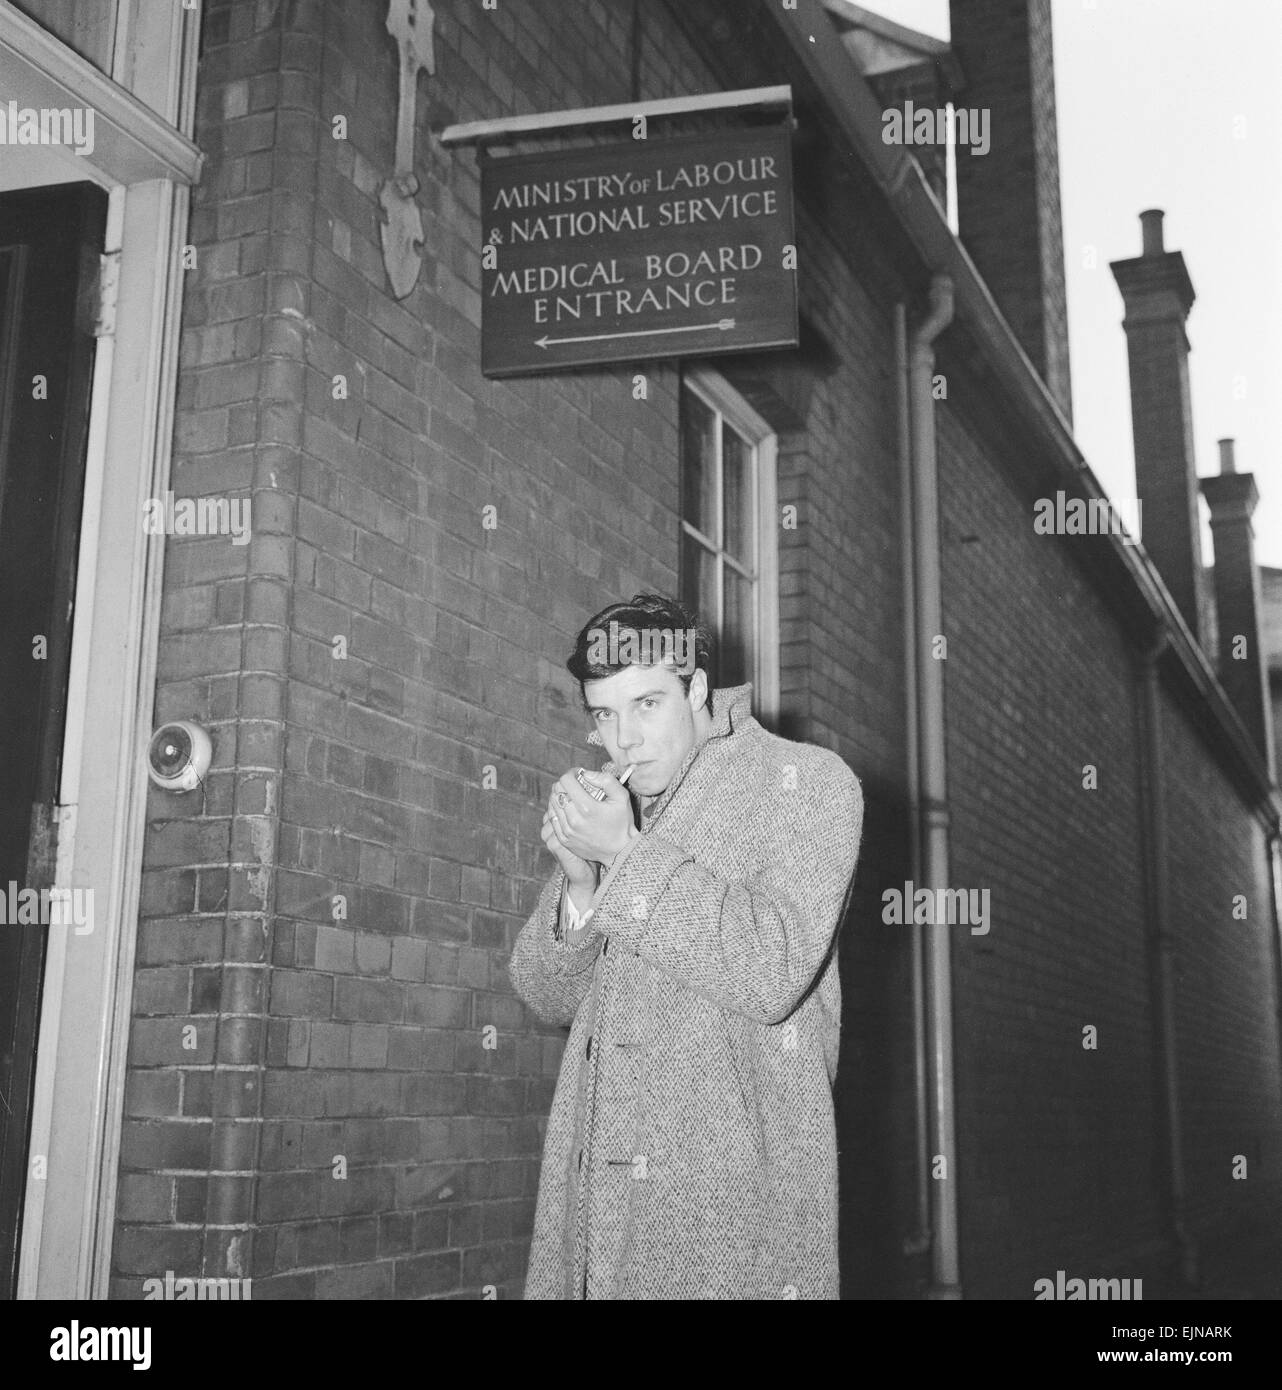 Marty Wilde, singer, pictured outside Army Recruiting Office ahead of his National Service Medical, 3rd February 1959. *** Local Caption *** Army Recruitment Centre Ministry of Labour and National Service Medical Board Entrance Stock Photo